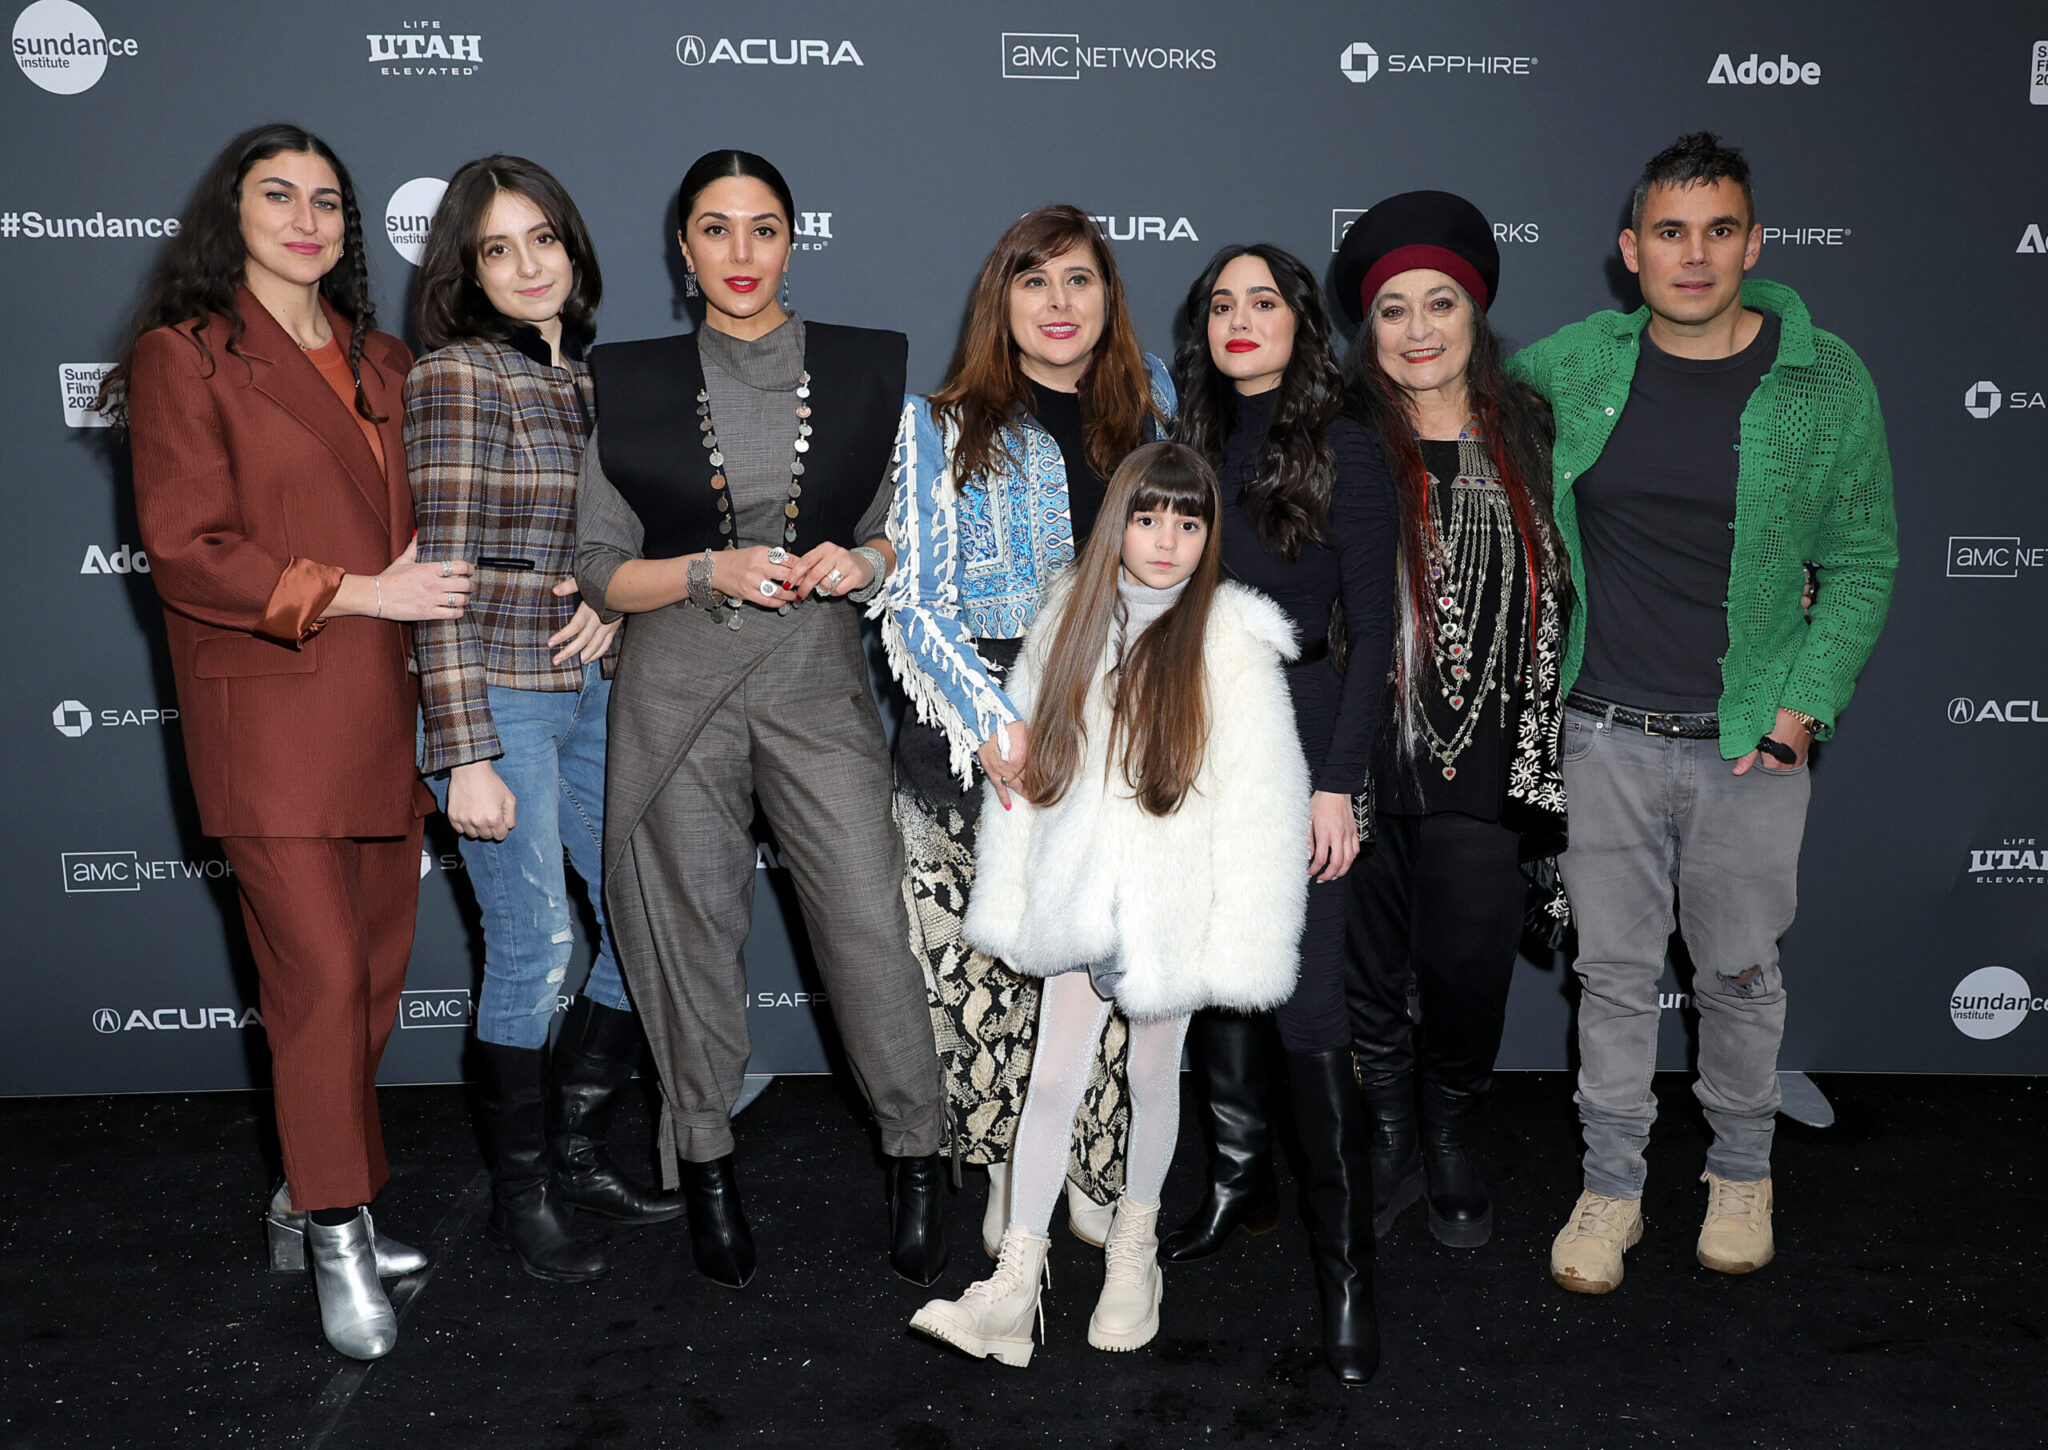 From left to right: A woman with long dark in a brown suit, a woman with medium-length dark hair and a checkered coat and jeans, a woman with black hair and a grey suit and black vest, a woman with light brown hair in a blue jacket, a little girl with long light brown hair in all white, a woman with long black hair in all black, a woman with long black hair and a black and red hat dressed in all black and wearing all-silver necklaces, and a man with black hair and a green jacket over an all-black outfit, stand in front of a step and repeat at the 2023 Sundance Film Festival.